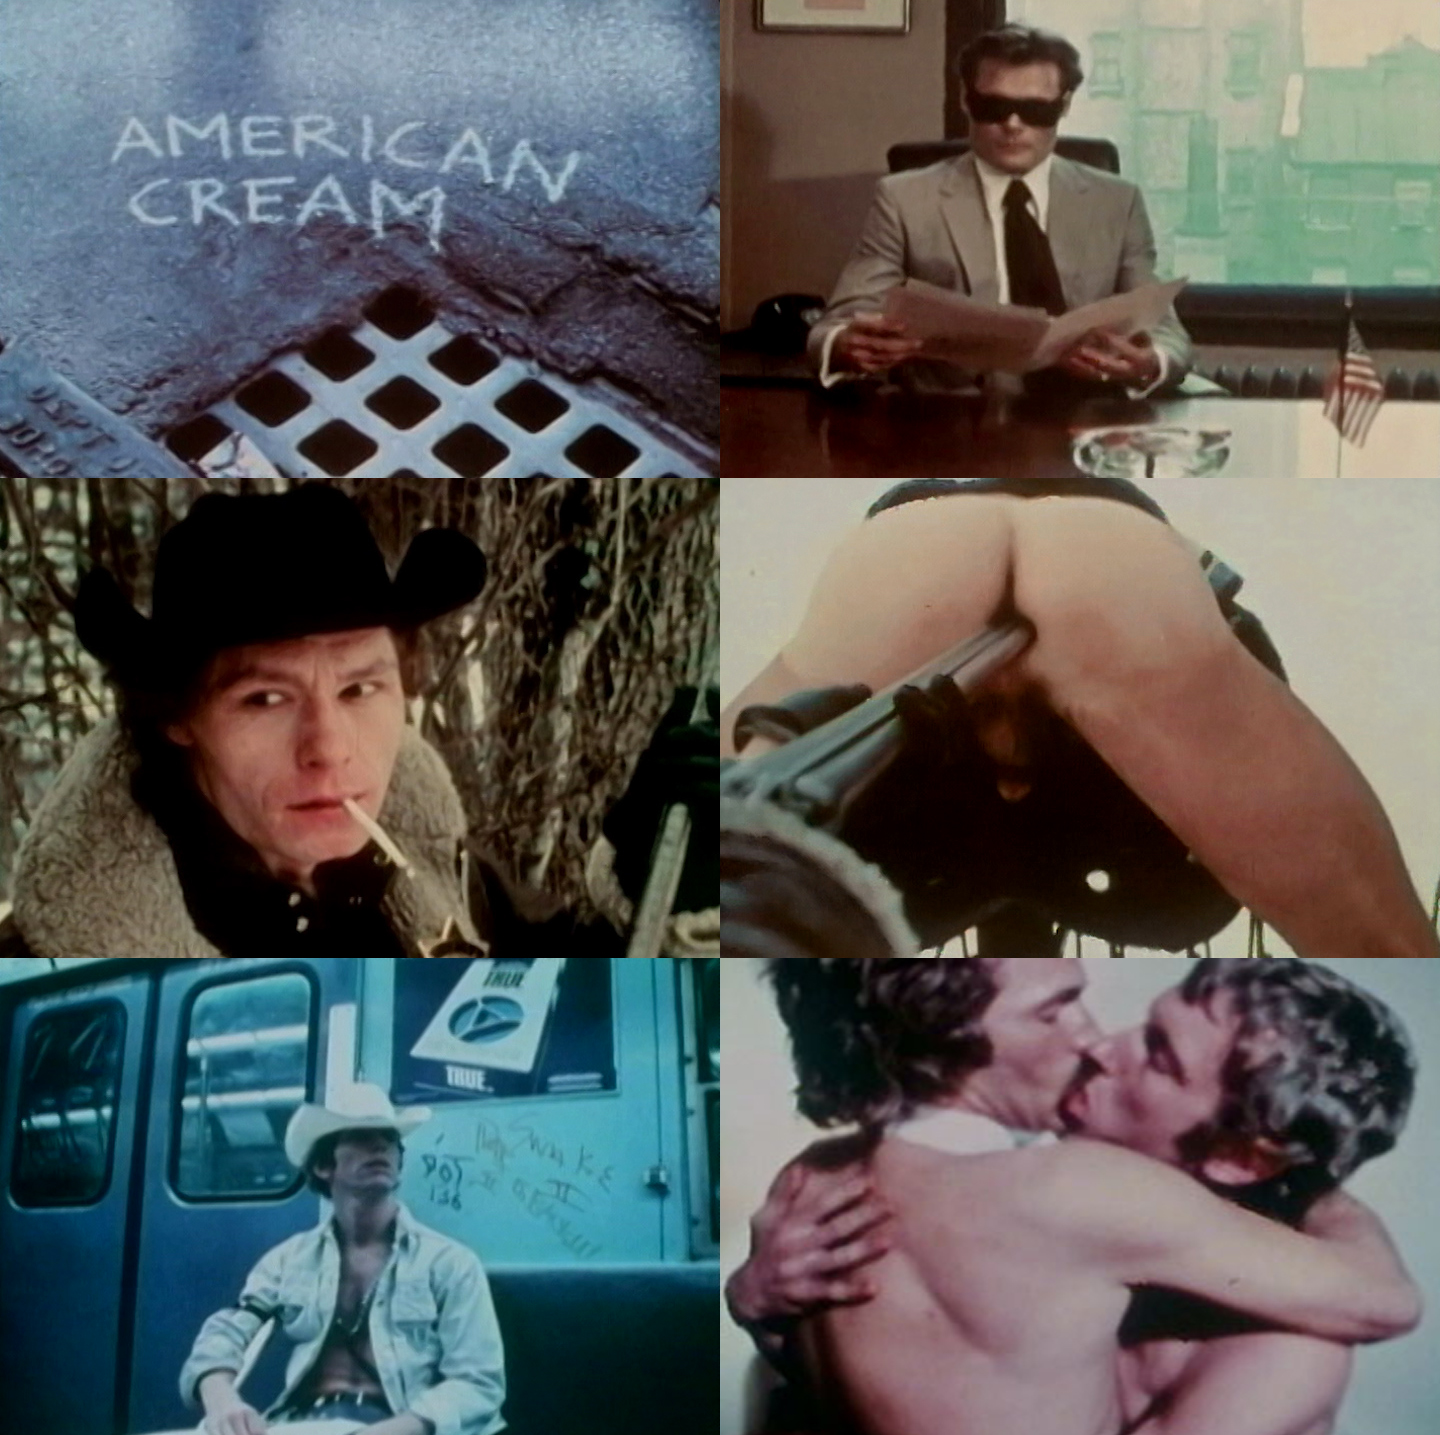 Images from American Cream